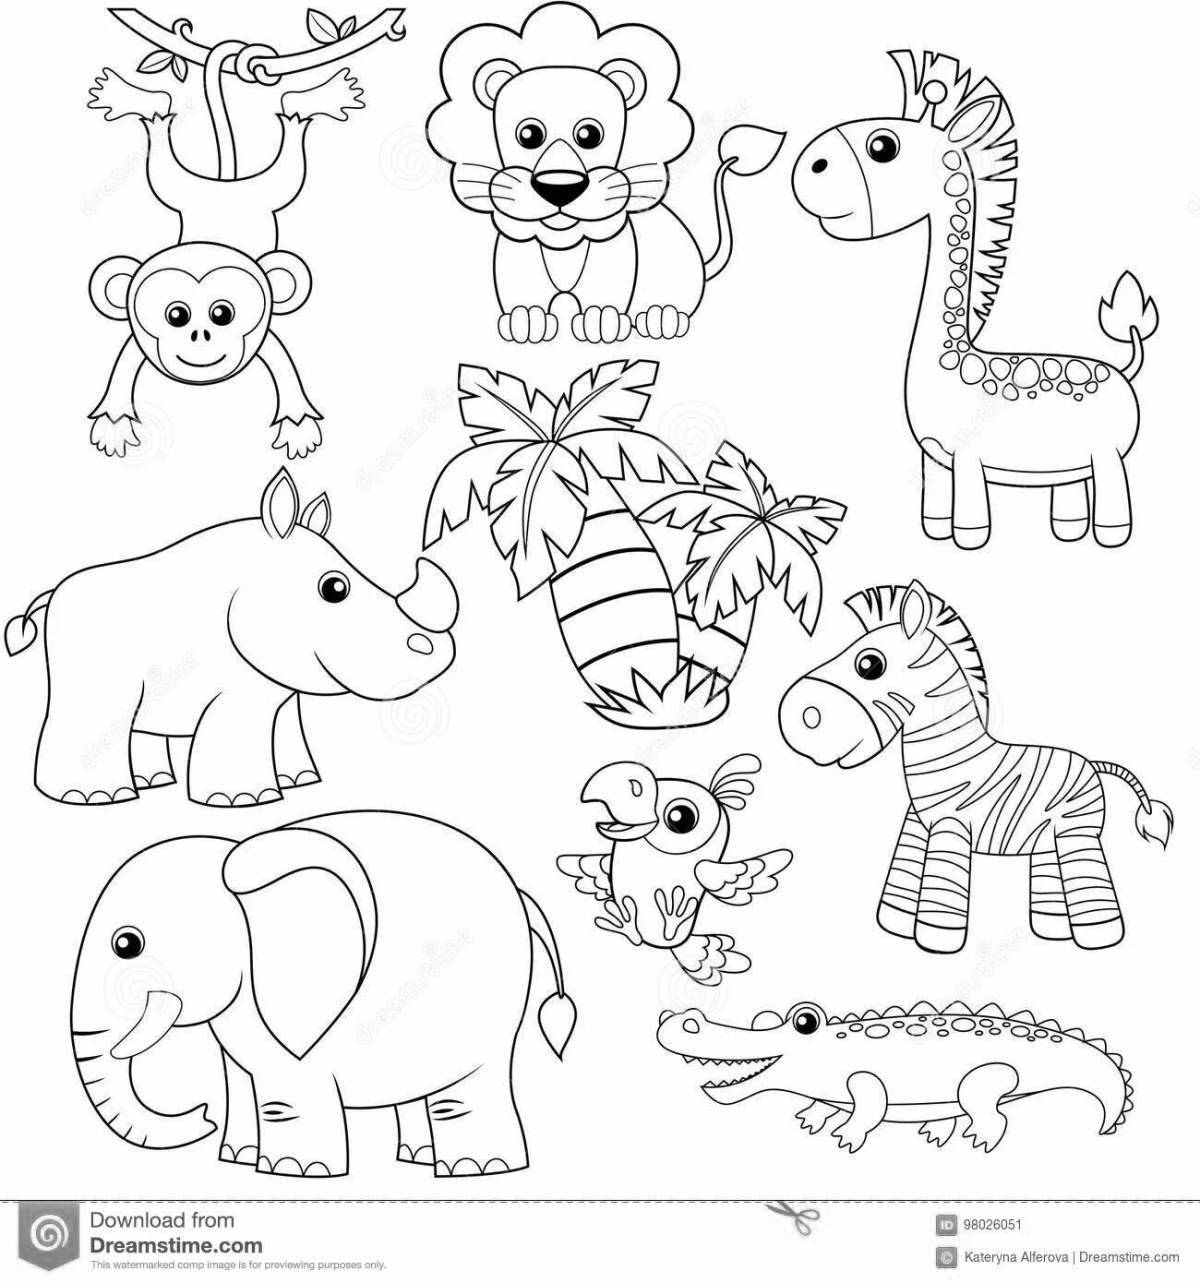 Great coloring of many animals